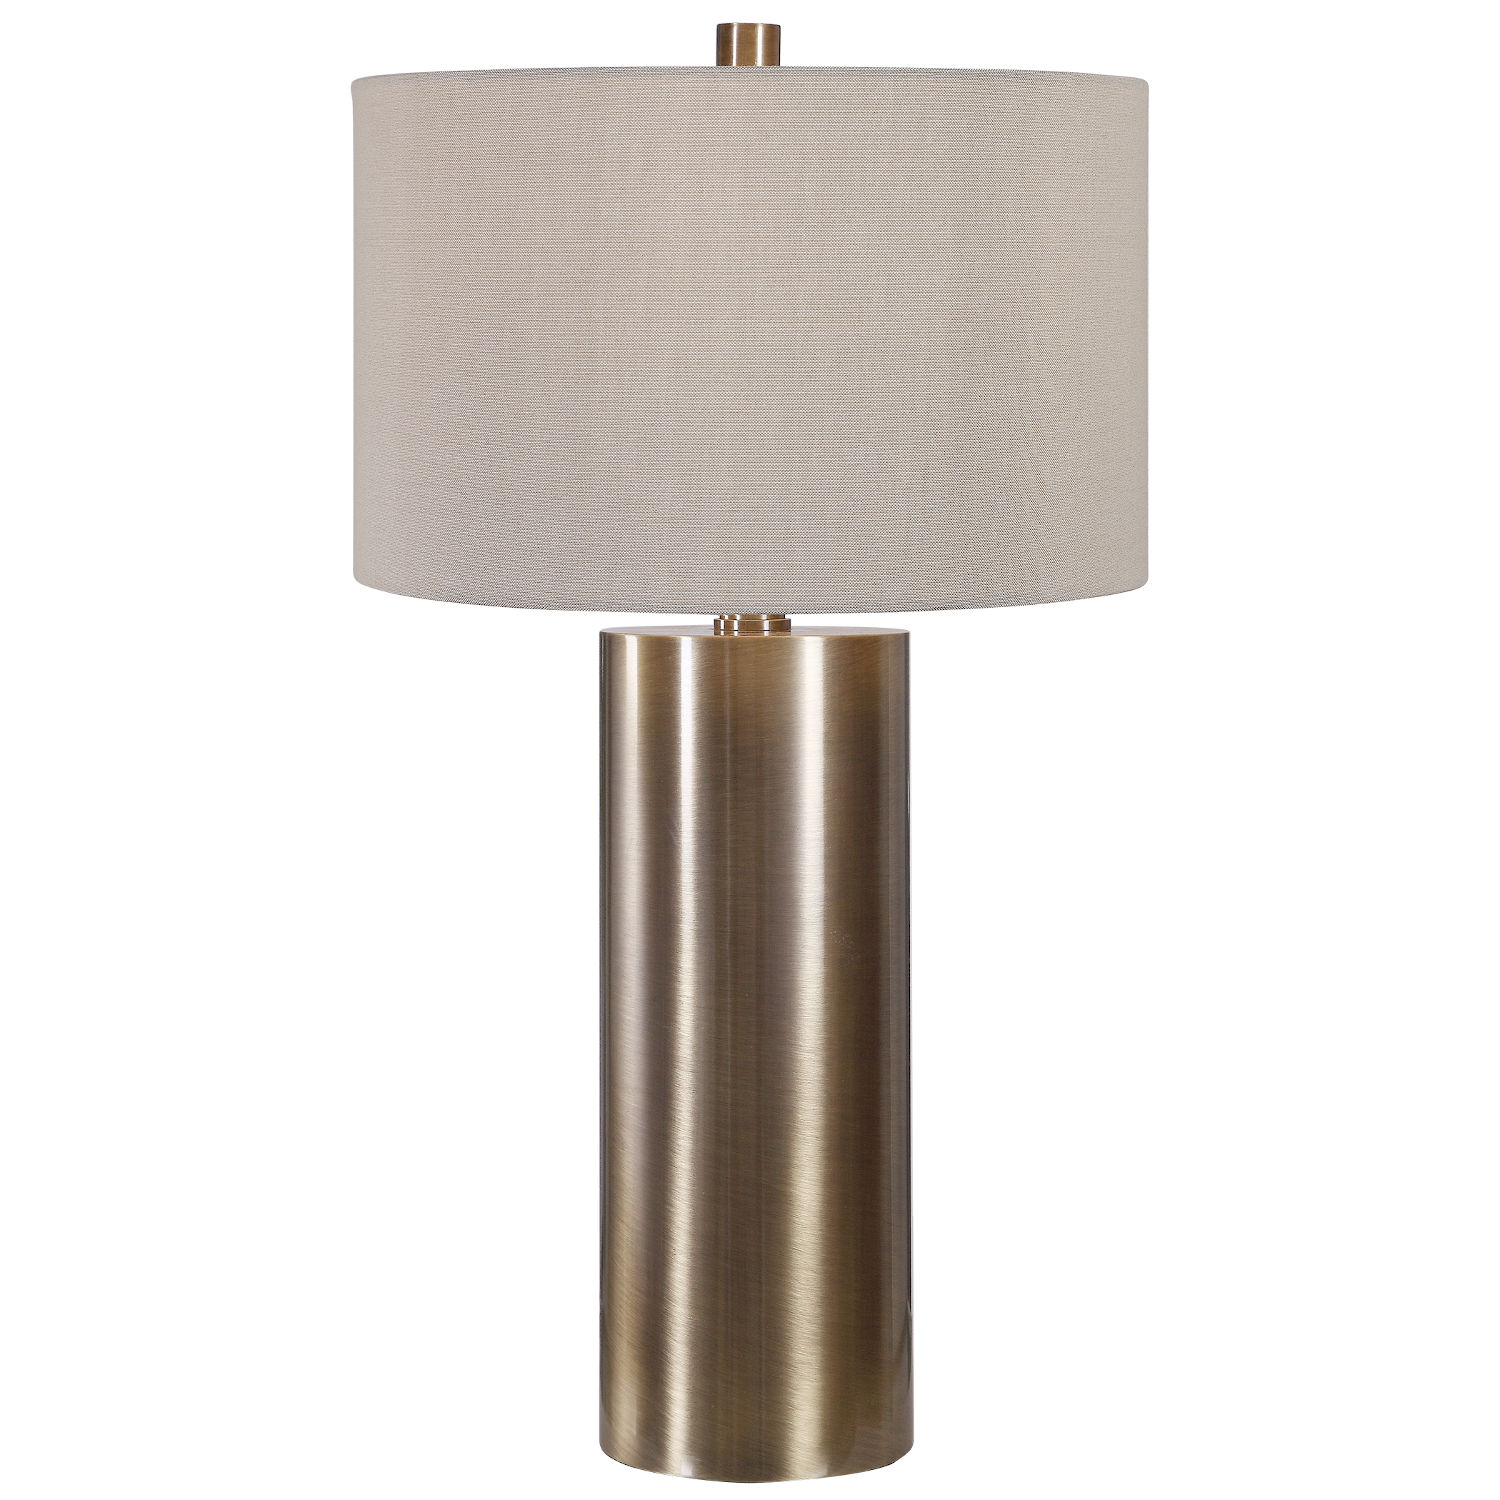 Taria Antique Brushed Brass Table Lamp